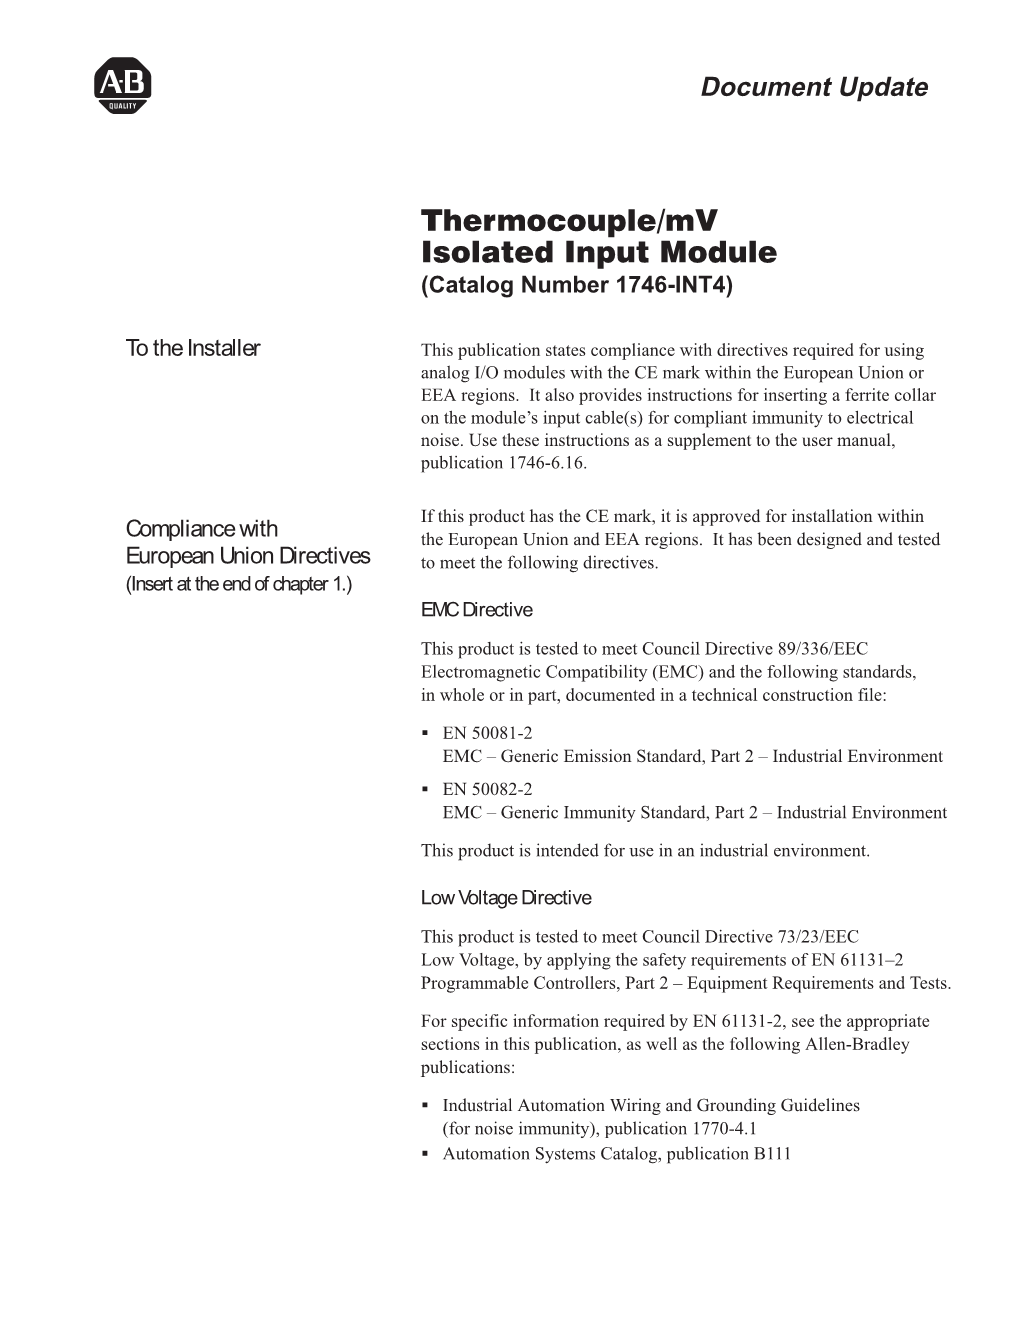 Thermocouple/Mv Isolated Input Module (Catalog Number 1746-INT4)